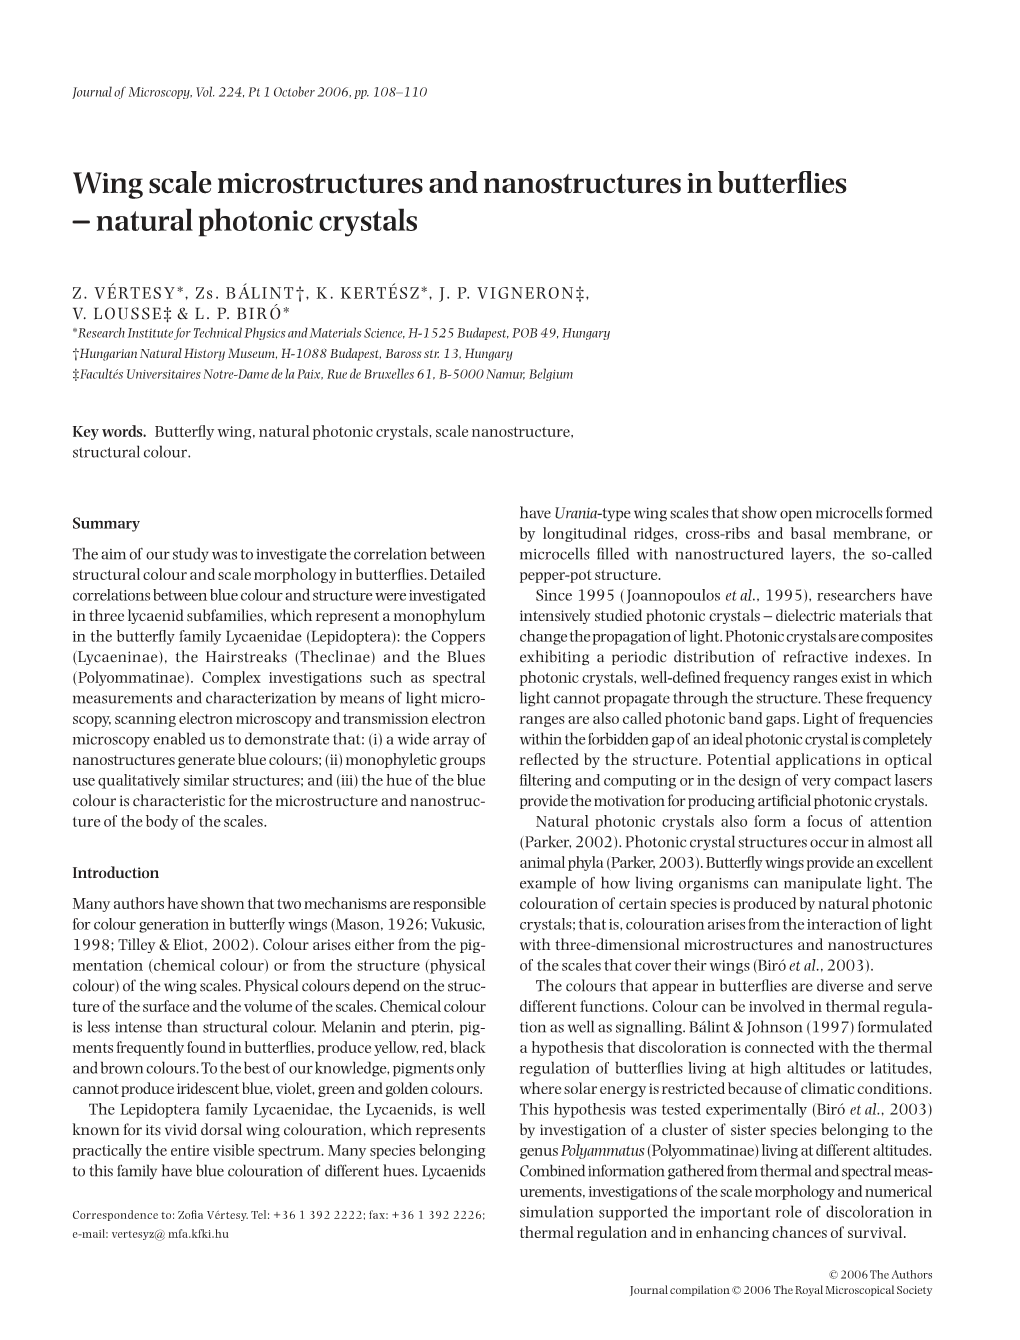 Wing Scale Microstructures and Nanostructures in Butterflies 109